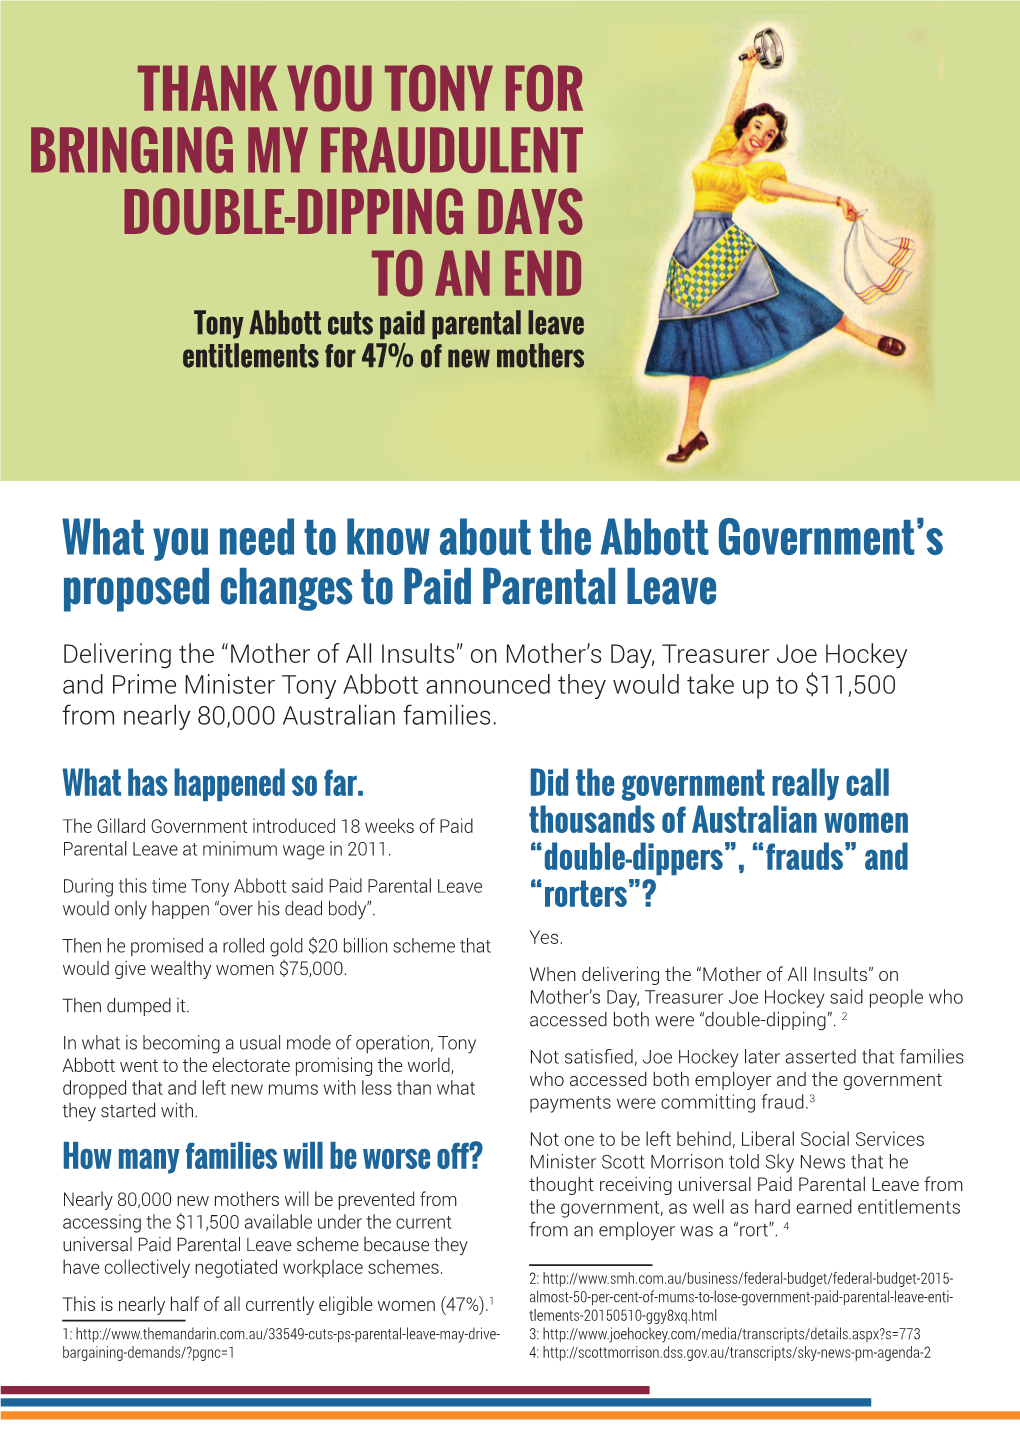 THANK YOU TONY for BRINGING MY FRAUDULENT DOUBLE-DIPPING DAYS to an END Tony Abbott Cuts Paid Parental Leave Entitlements for 47% of New Mothers